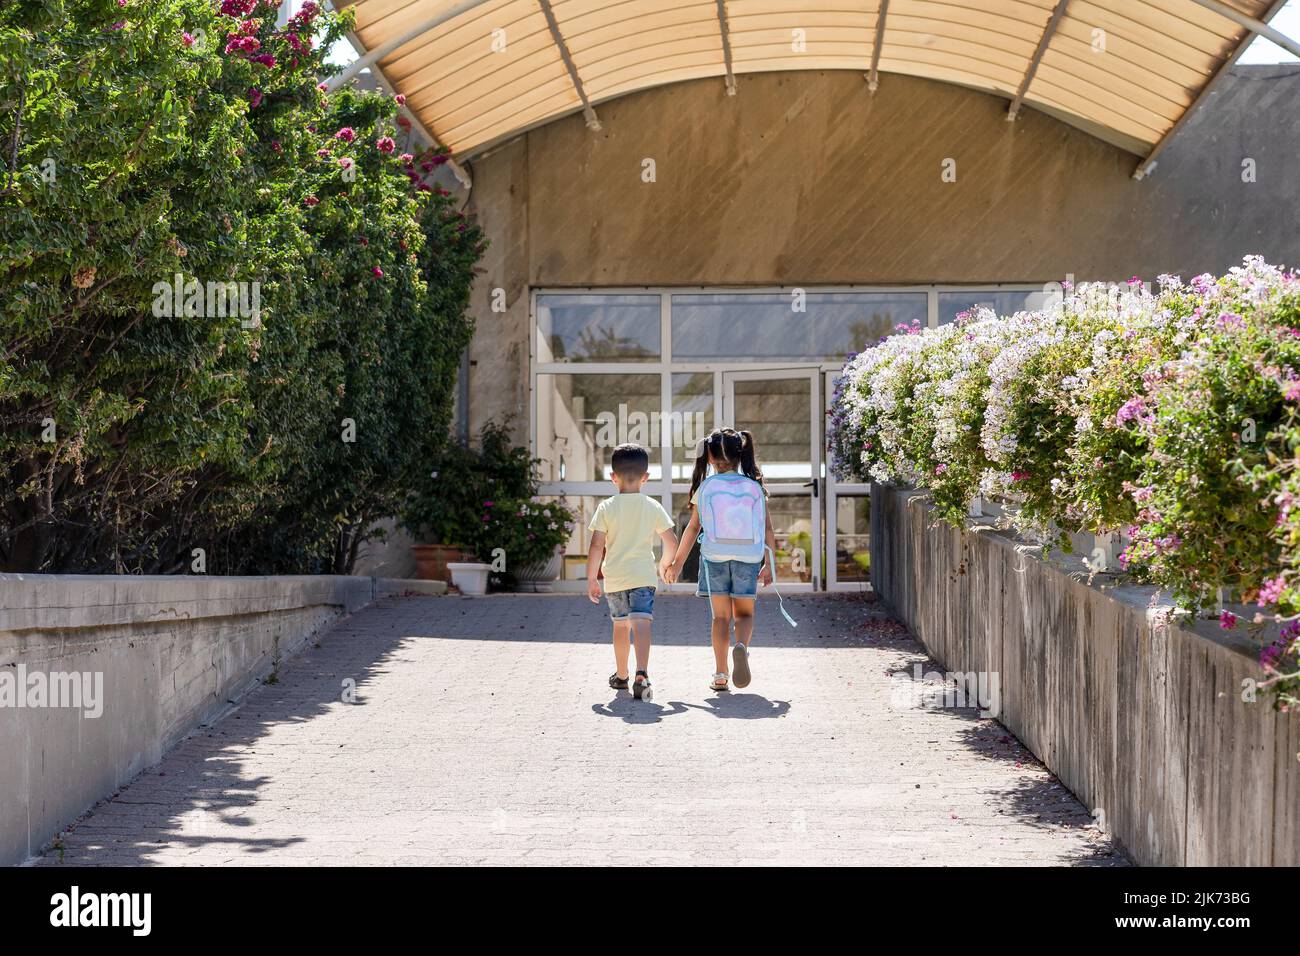 A young children going back to school. Little girl with a tie dye backpack walks to school with her brother. Stock Photo